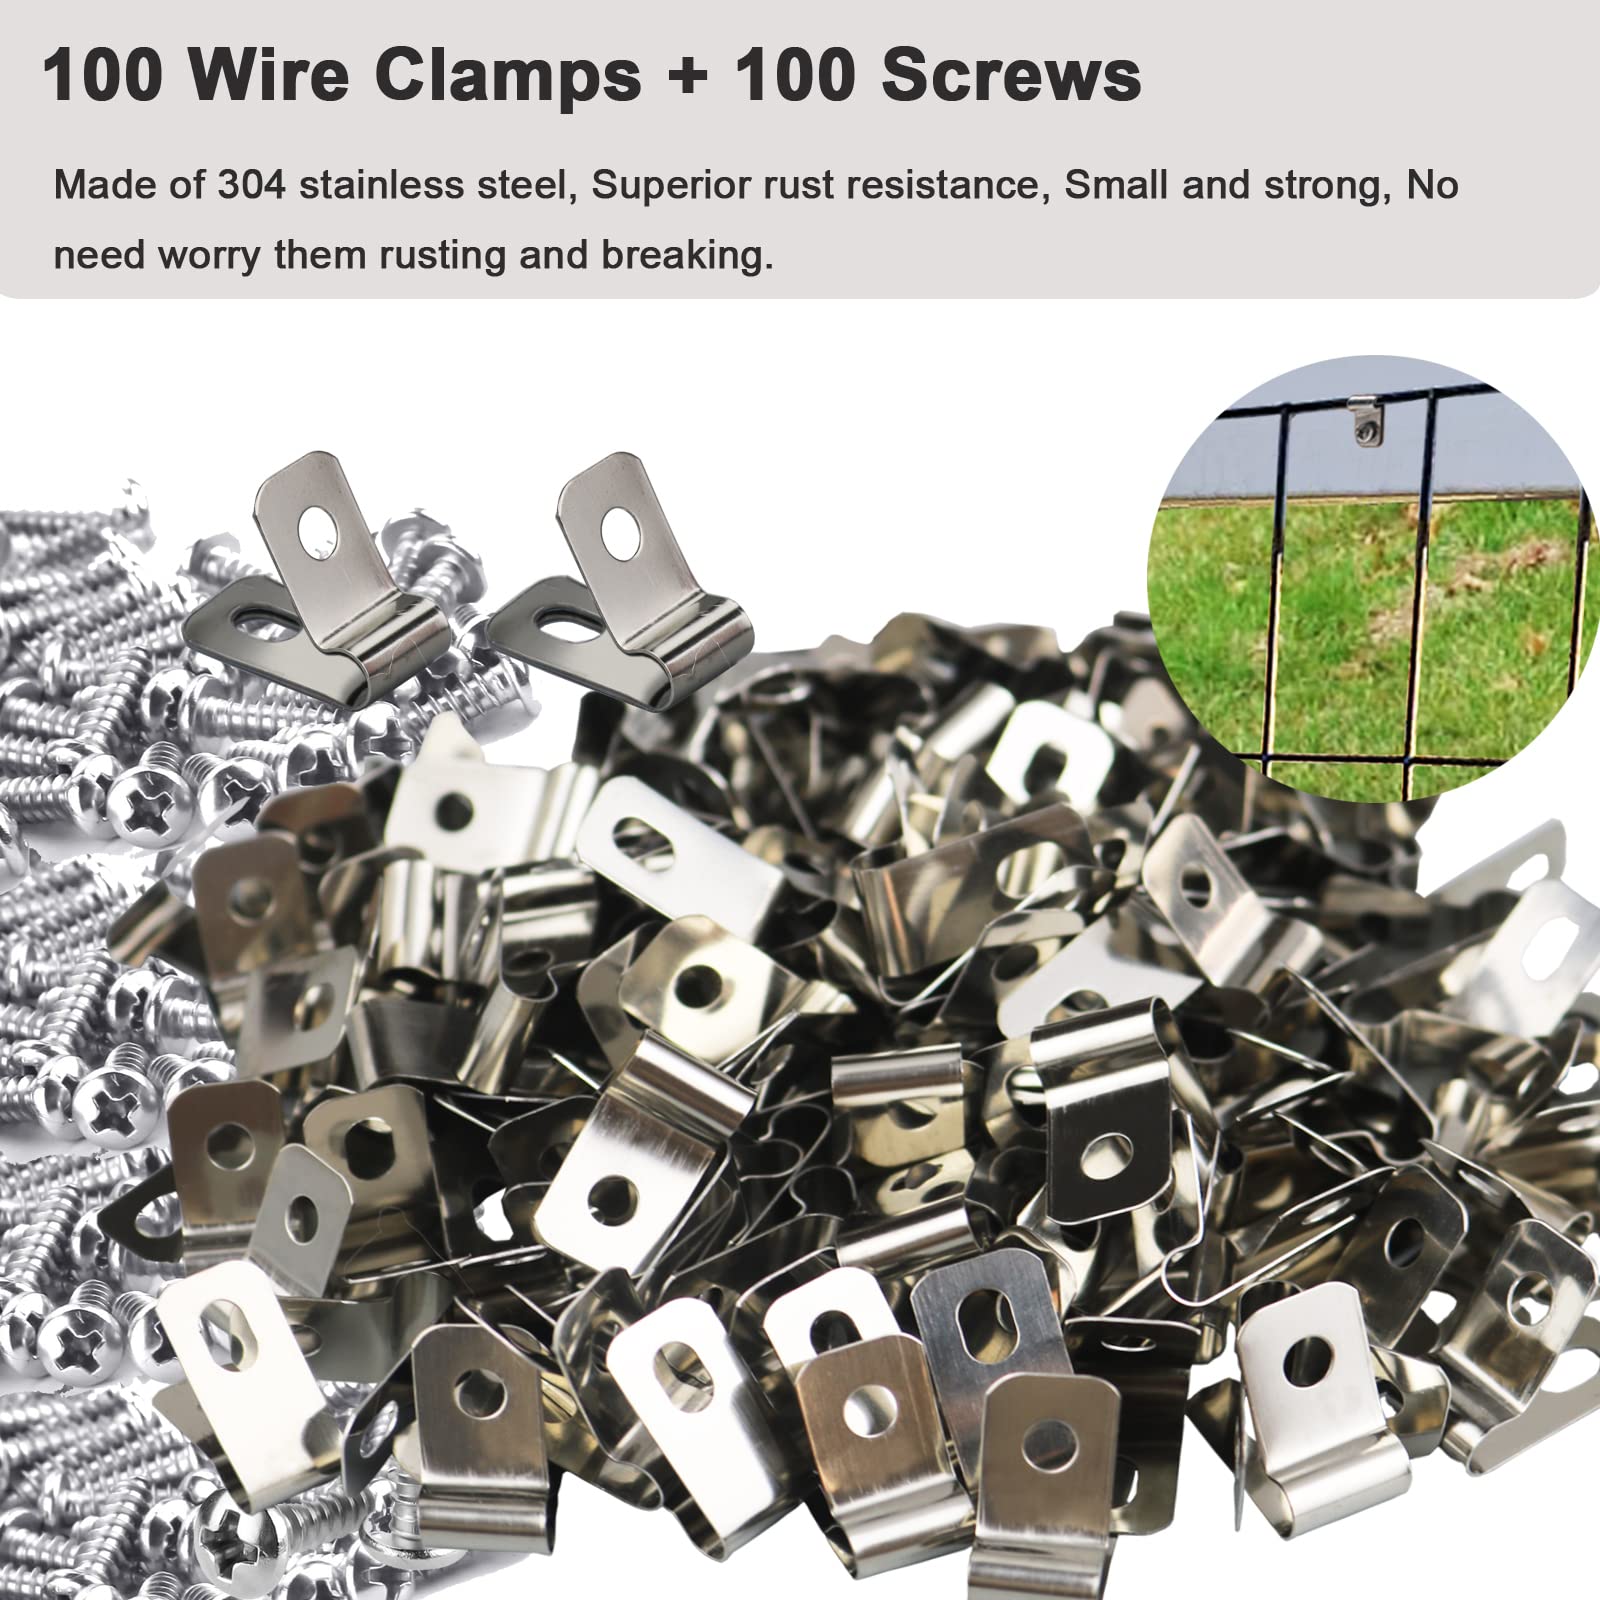 100 Pcs Fence Wire Clamps with 100 Pcs Screws for 2-6 Gauge Wire Fencing, Stainless Steel Wire Clips Mount Welded Wire to Vinyl, Wood or Metal Fence